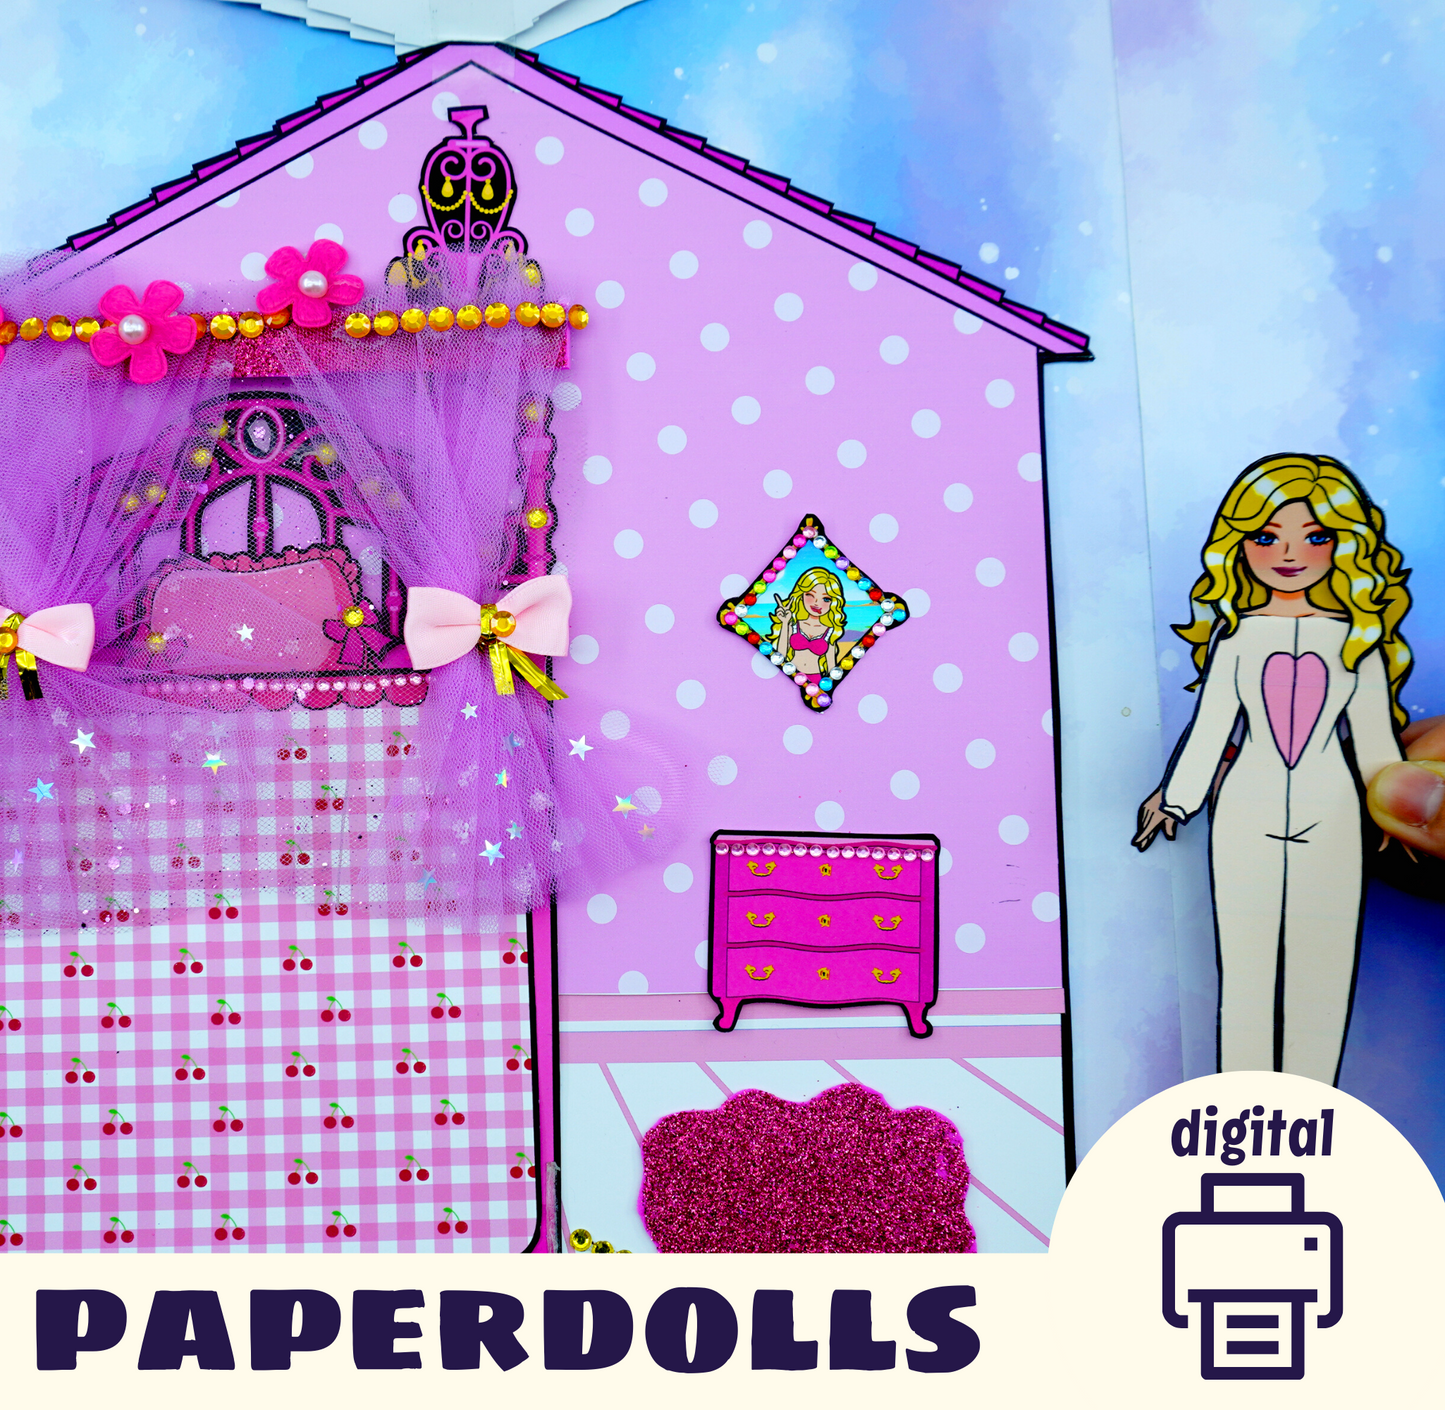 The Paper Doll House